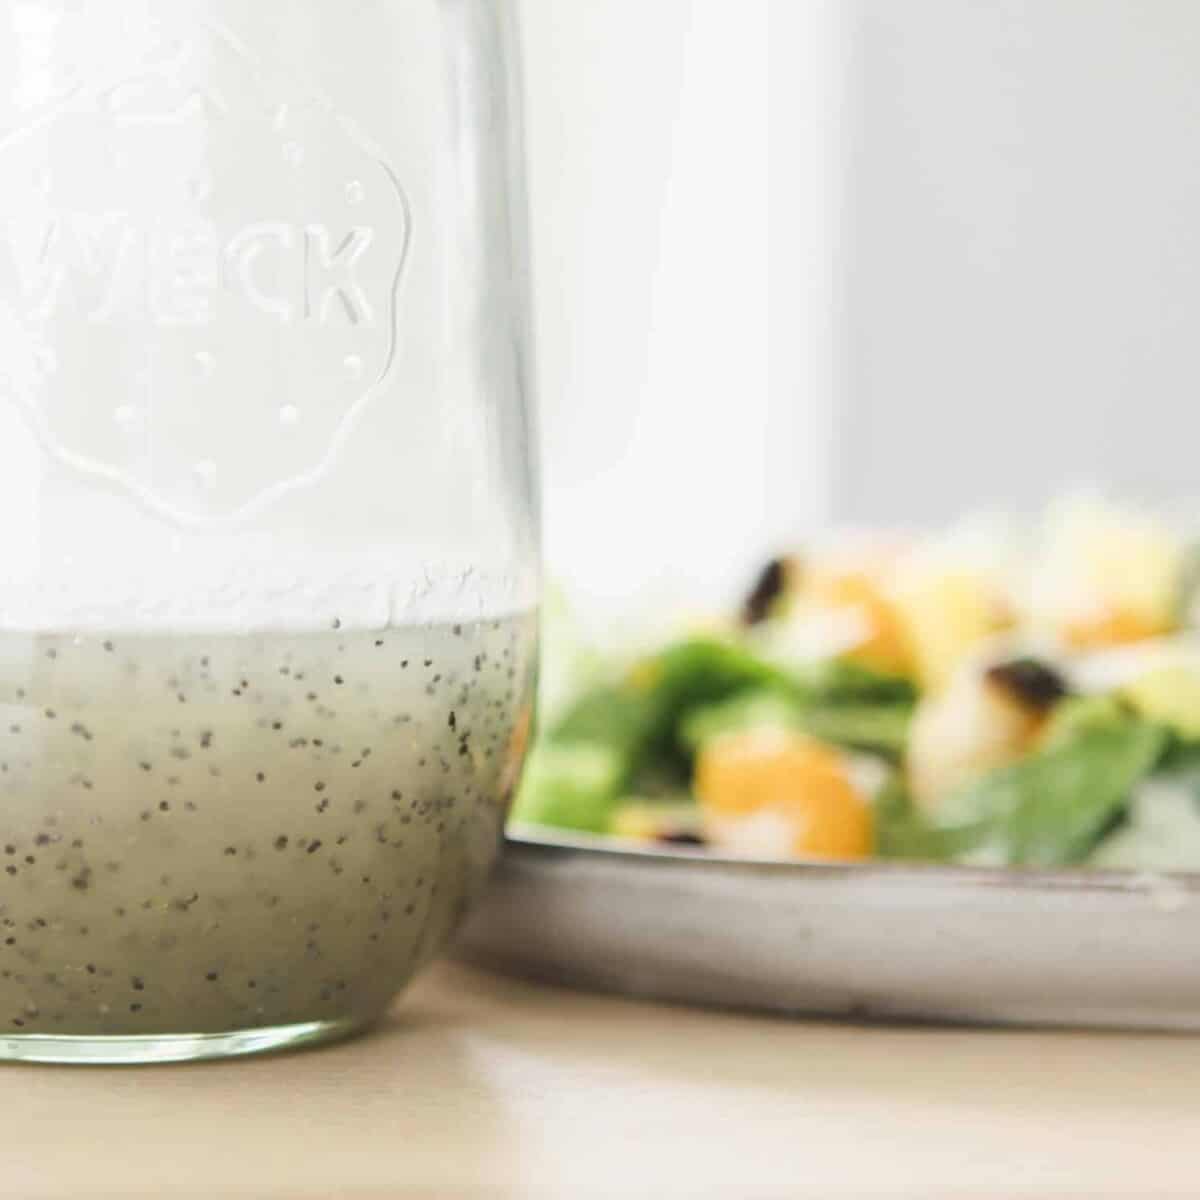 A bottle sits on the table top filled with homemade poppy seed dressing. Beside it sits a vibrant salad on a plate.